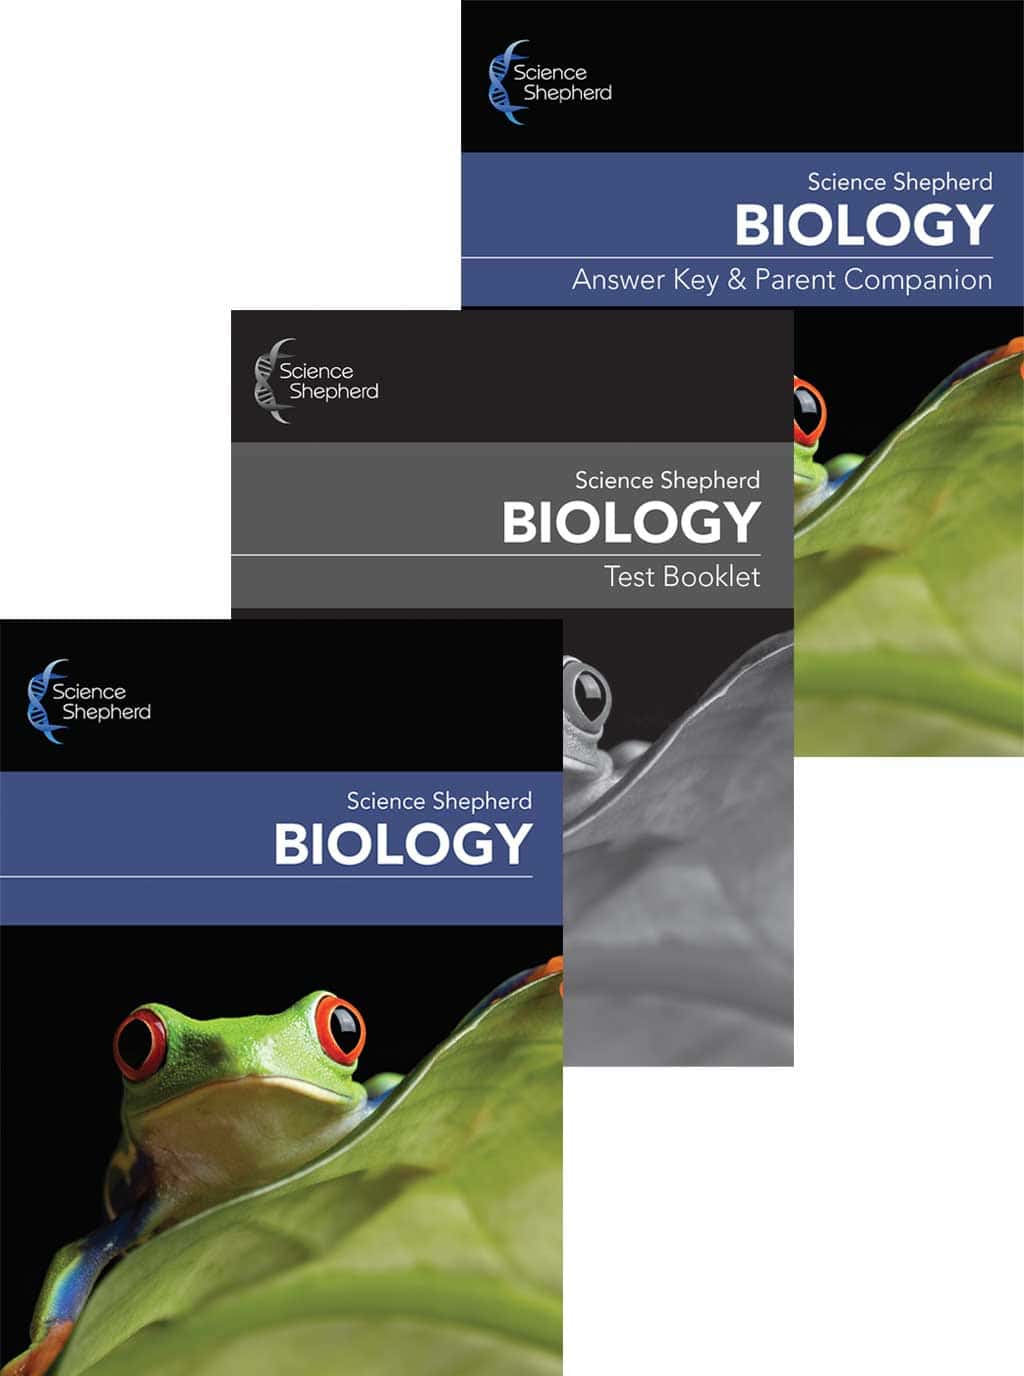 Science Shepherd Homeschool Biology Curriculum 3-Book Set with textbook, test booklet and answer key